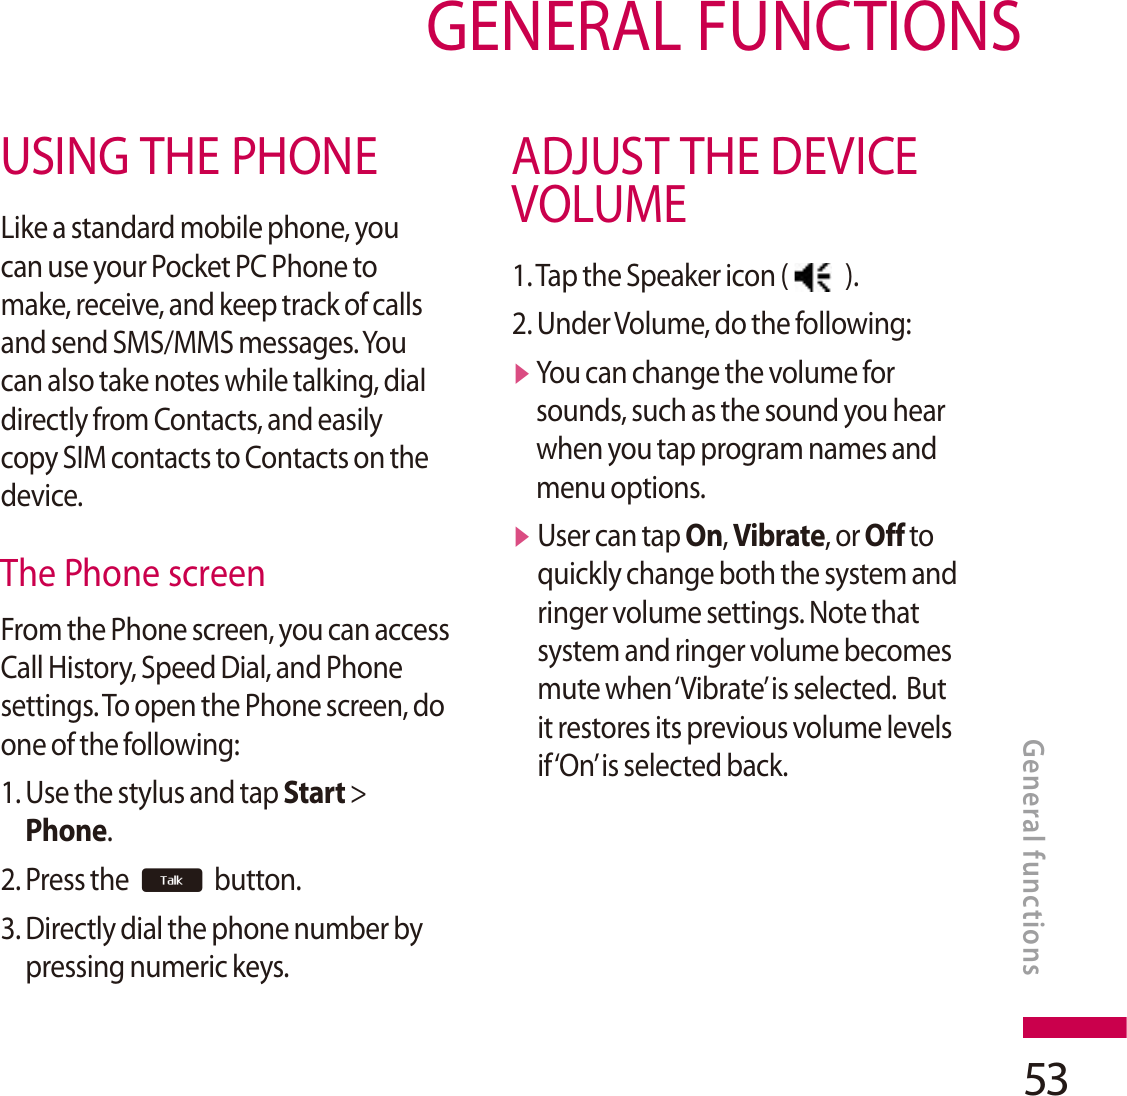 53GENERAL FUNCTIONSUSING THE PHONELike a standard mobile phone, you can use your Pocket PC Phone to make, receive, and keep track of calls and send SMS/MMS messages. You can also take notes while talking, dial directly from Contacts, and easily copy SIM contacts to Contacts on the device.The Phone screenFrom the Phone screen, you can access Call History, Speed Dial, and Phone settings. To open the Phone screen, do one of the following:1. Use the stylus and tap Start &gt;Phone.2. Press the  button.3. Directly dial the phone number by pressing numeric keys.ADJUST THE DEVICEVOLUME1. Tap the Speaker icon (   ).2. Under Volume, do the following:vYou can change the volume for sounds, such as the sound you hear when you tap program names and menu options.vUser can tap On, Vibrate, or Off to quickly change both the system and ringer volume settings. Note that system and ringer volume becomes mute when ‘Vibrate’ is selected.  But it restores its previous volume levels if ‘On’ is selected back.General functions